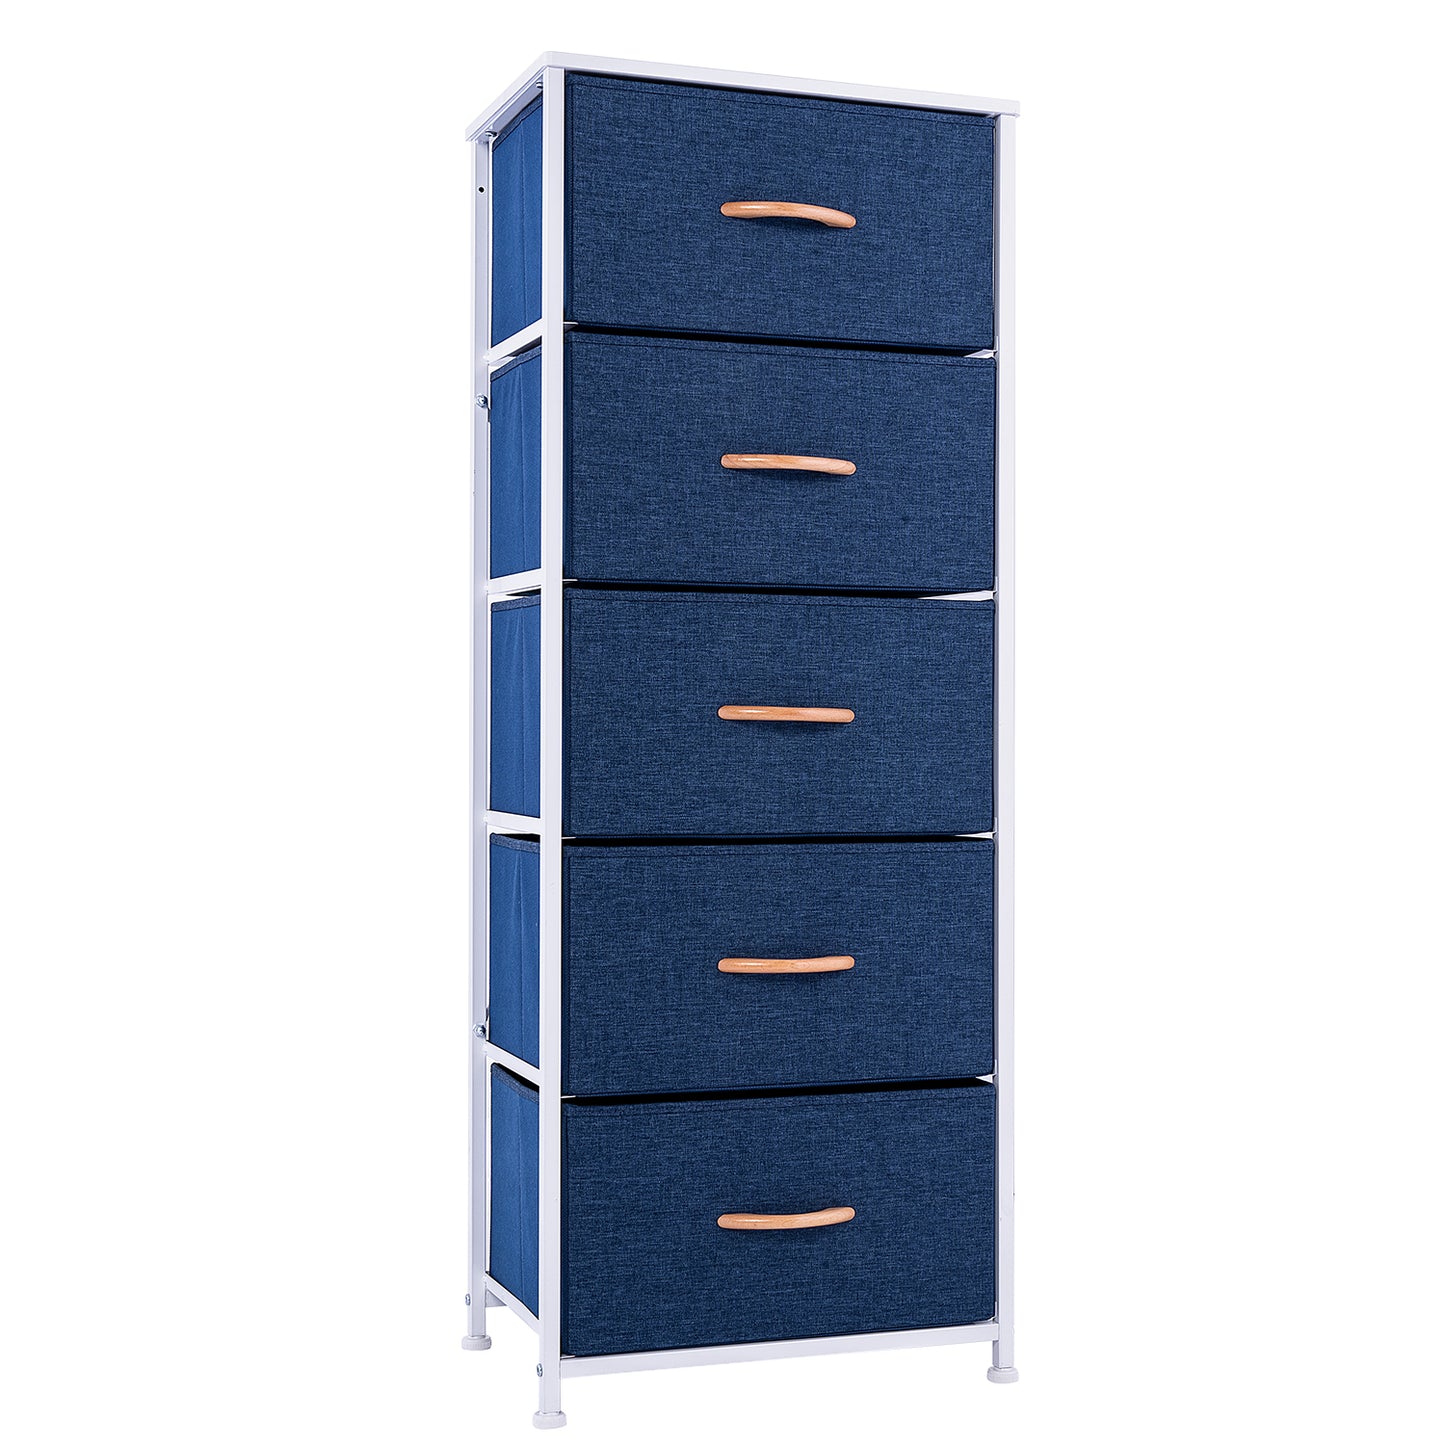 Waytrim Polyester and non-woven fabric drawer